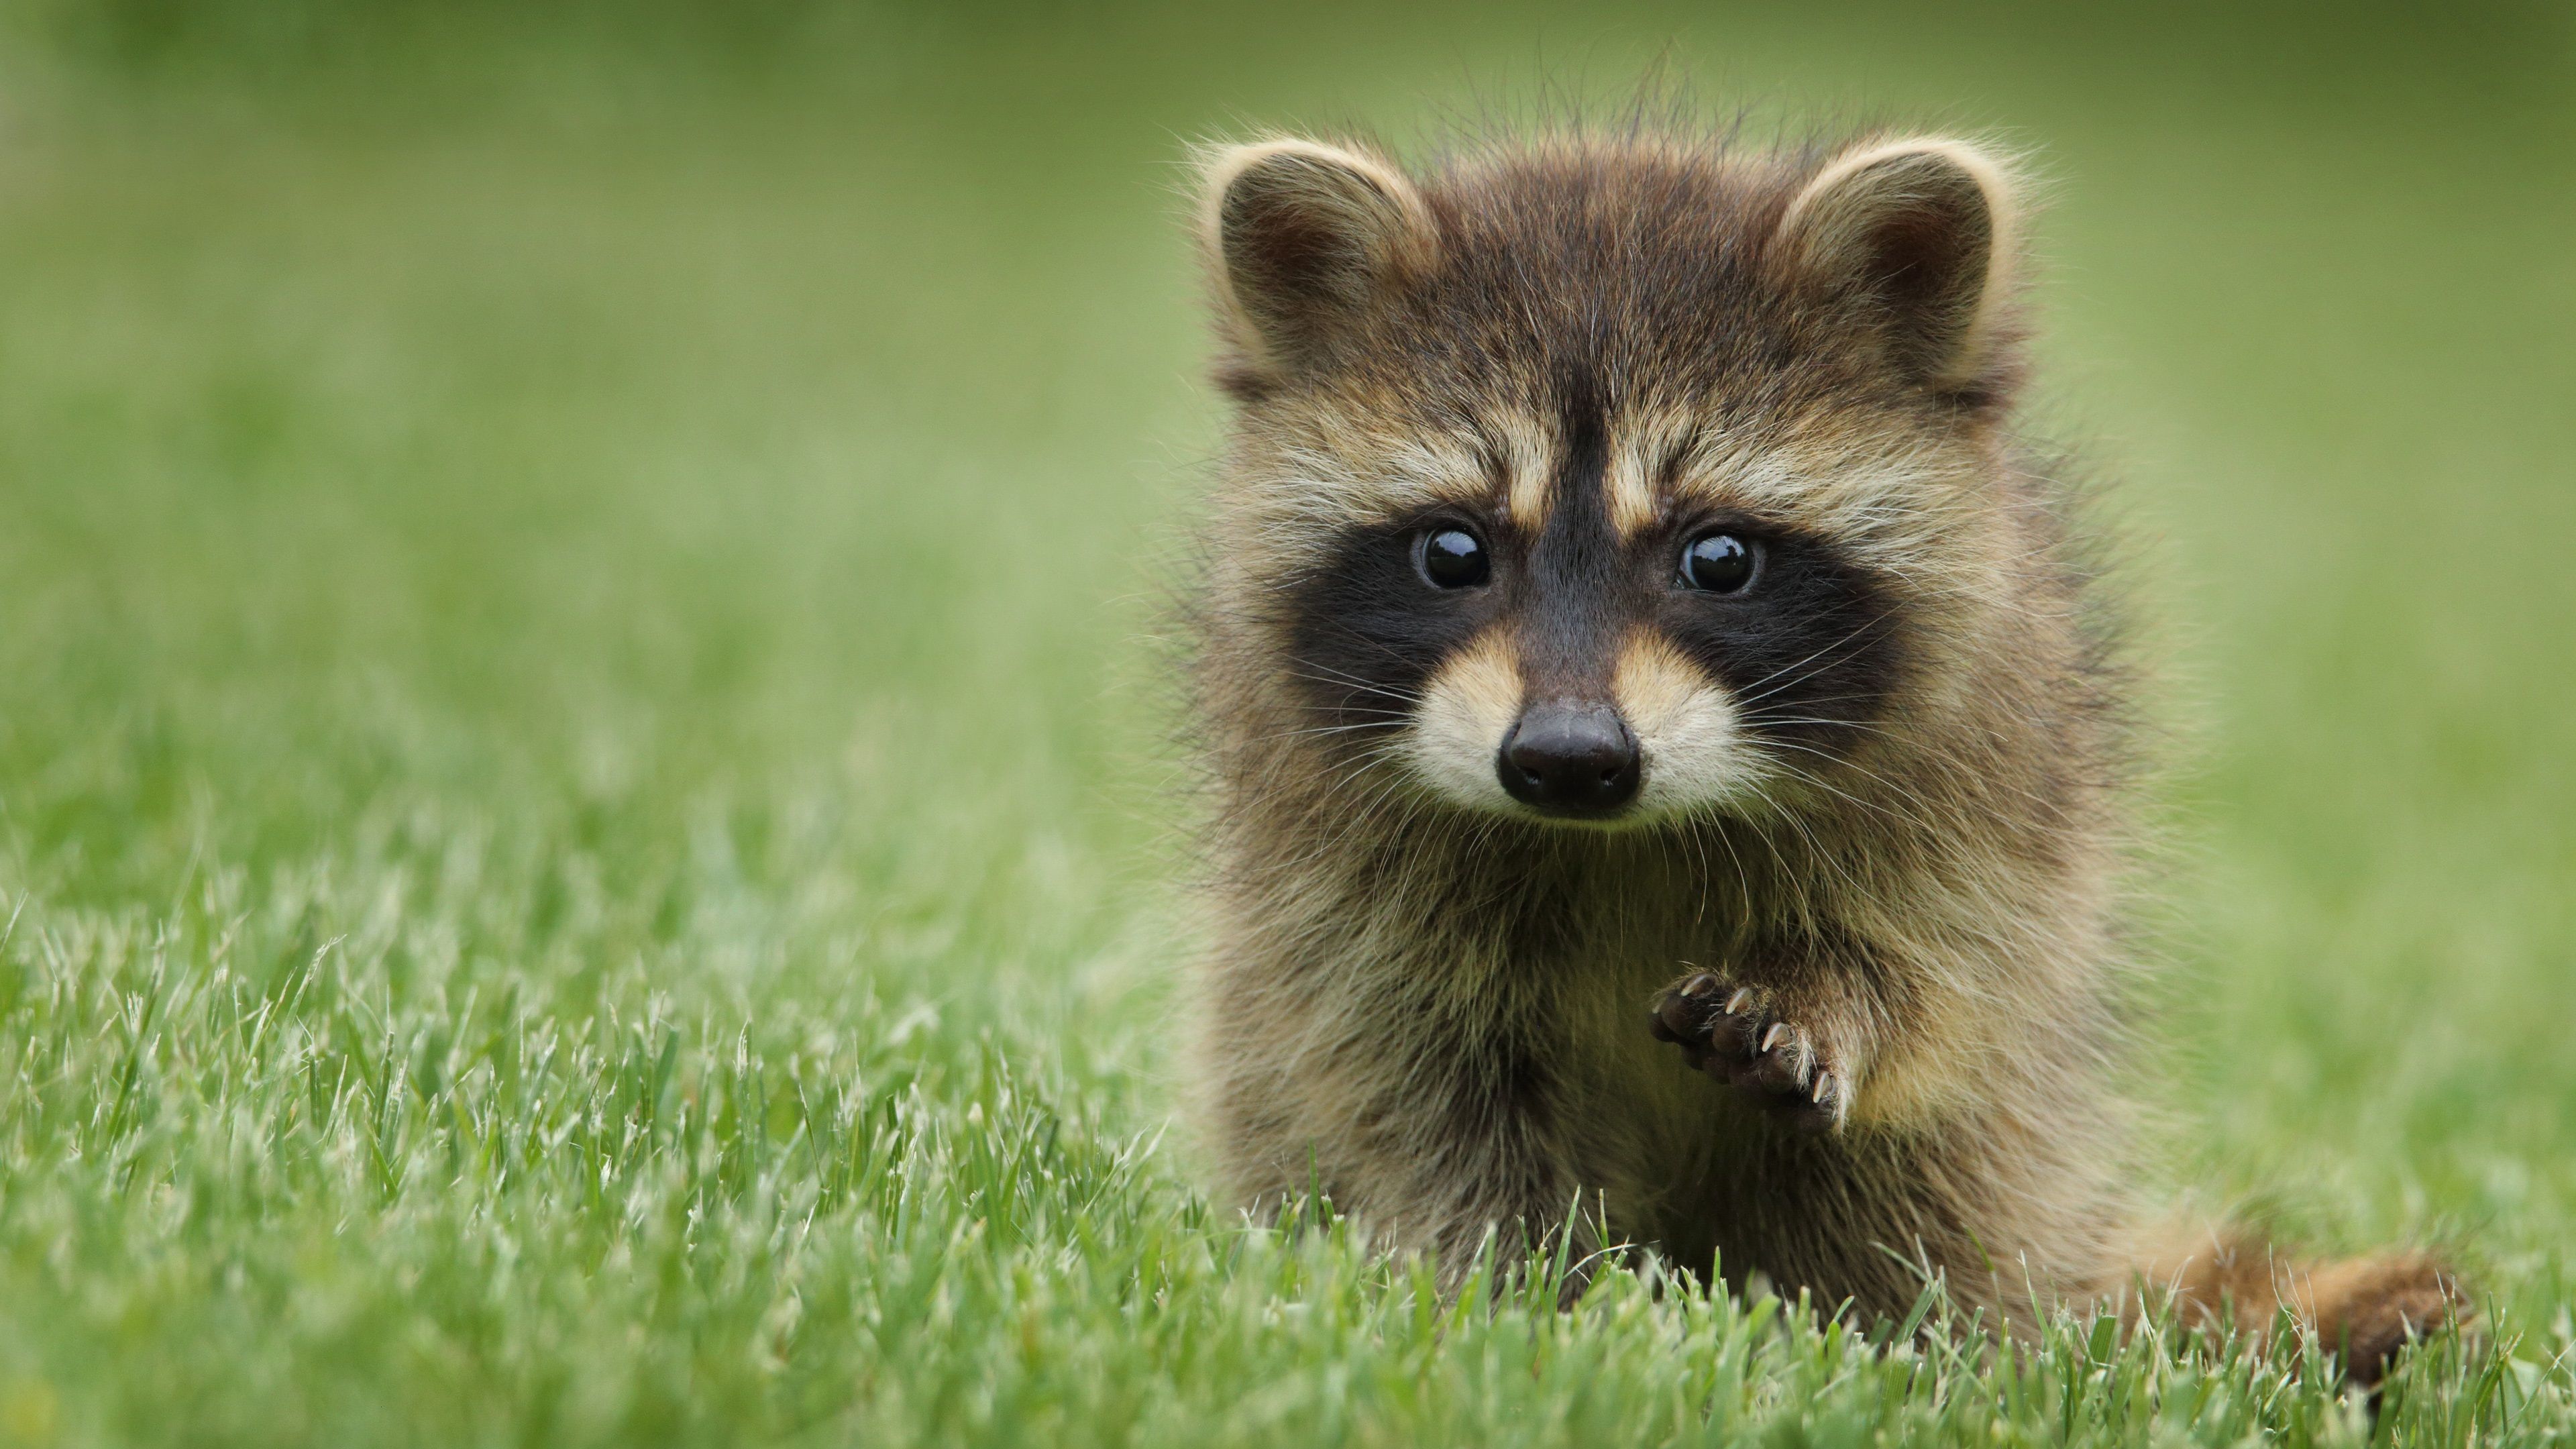 Wallpaper Raccoon in the grass, playful 3840x2160 UHD 4K Picture, Image